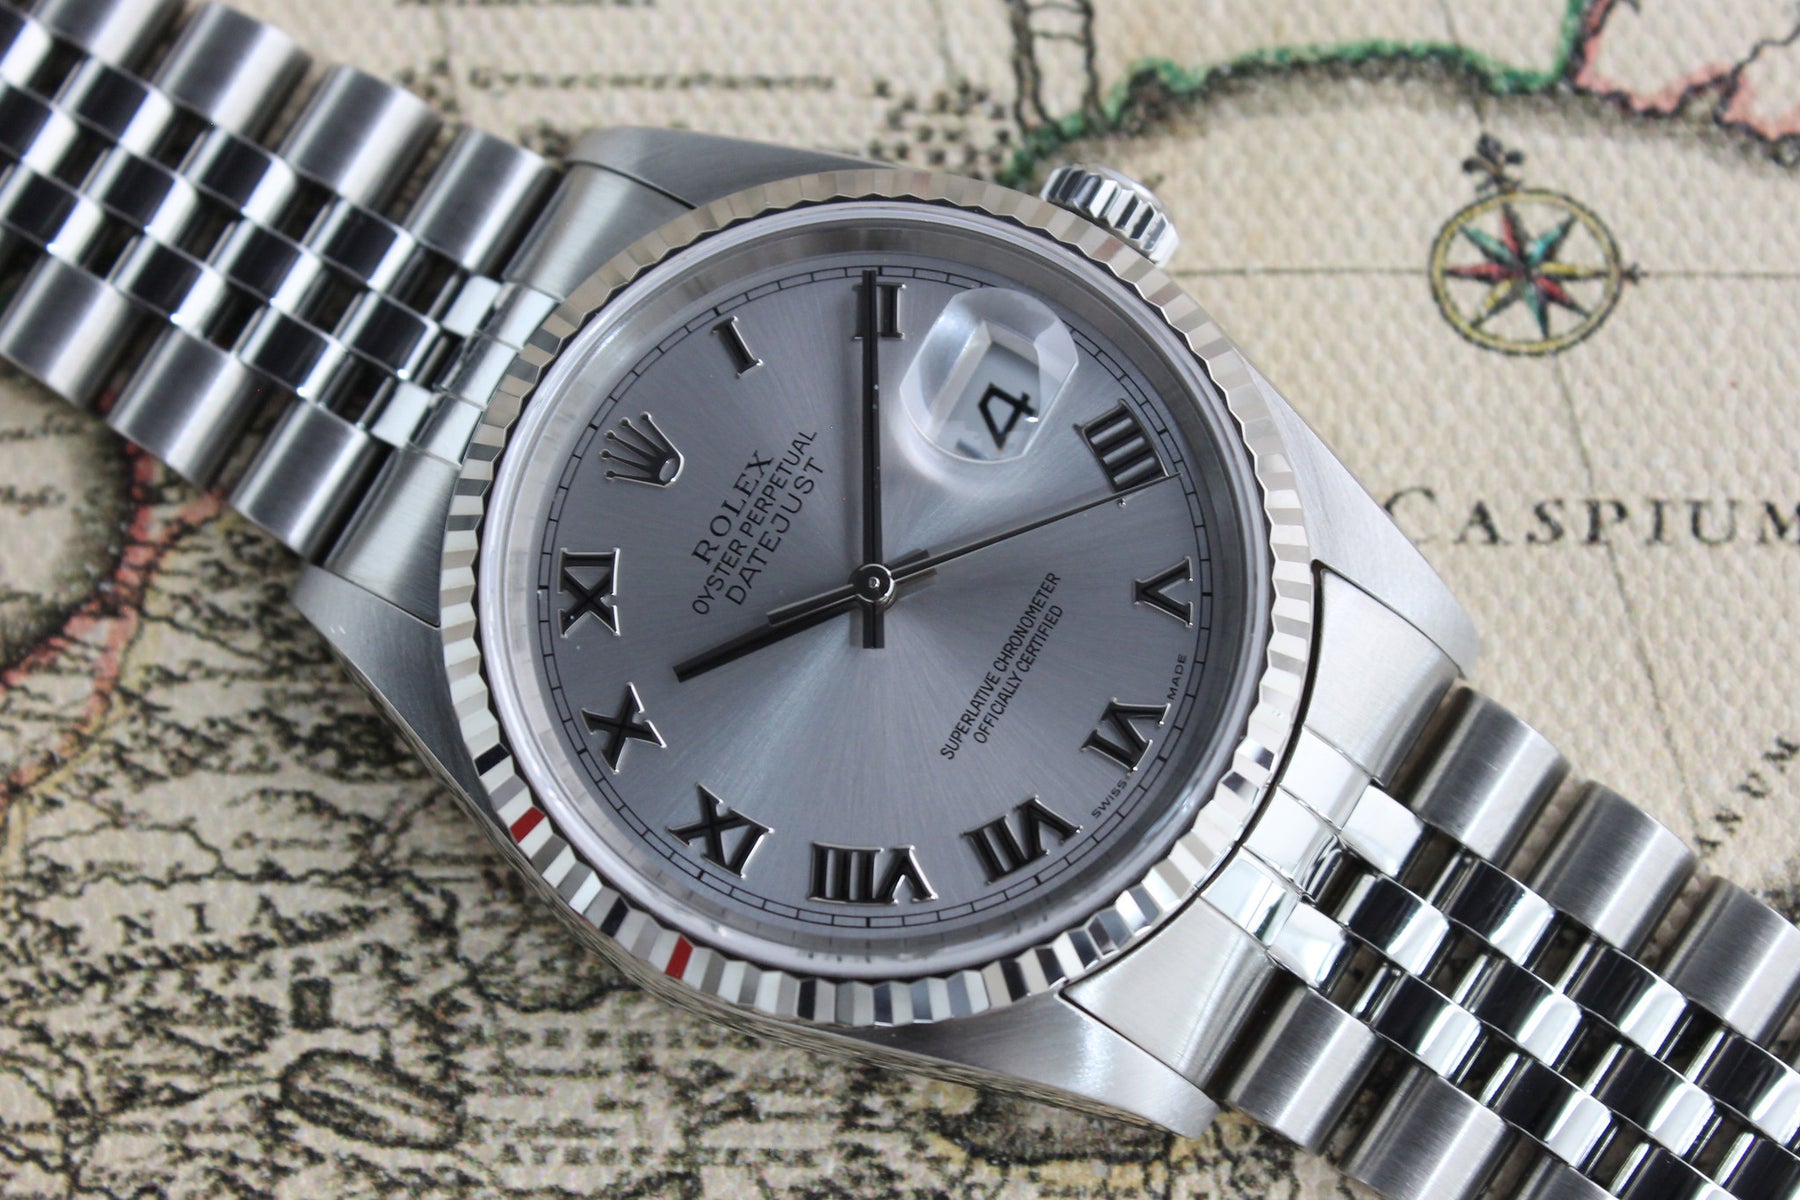 2004 - Rolex Datejust ST/WG (With Papers) - Momentum Dubai